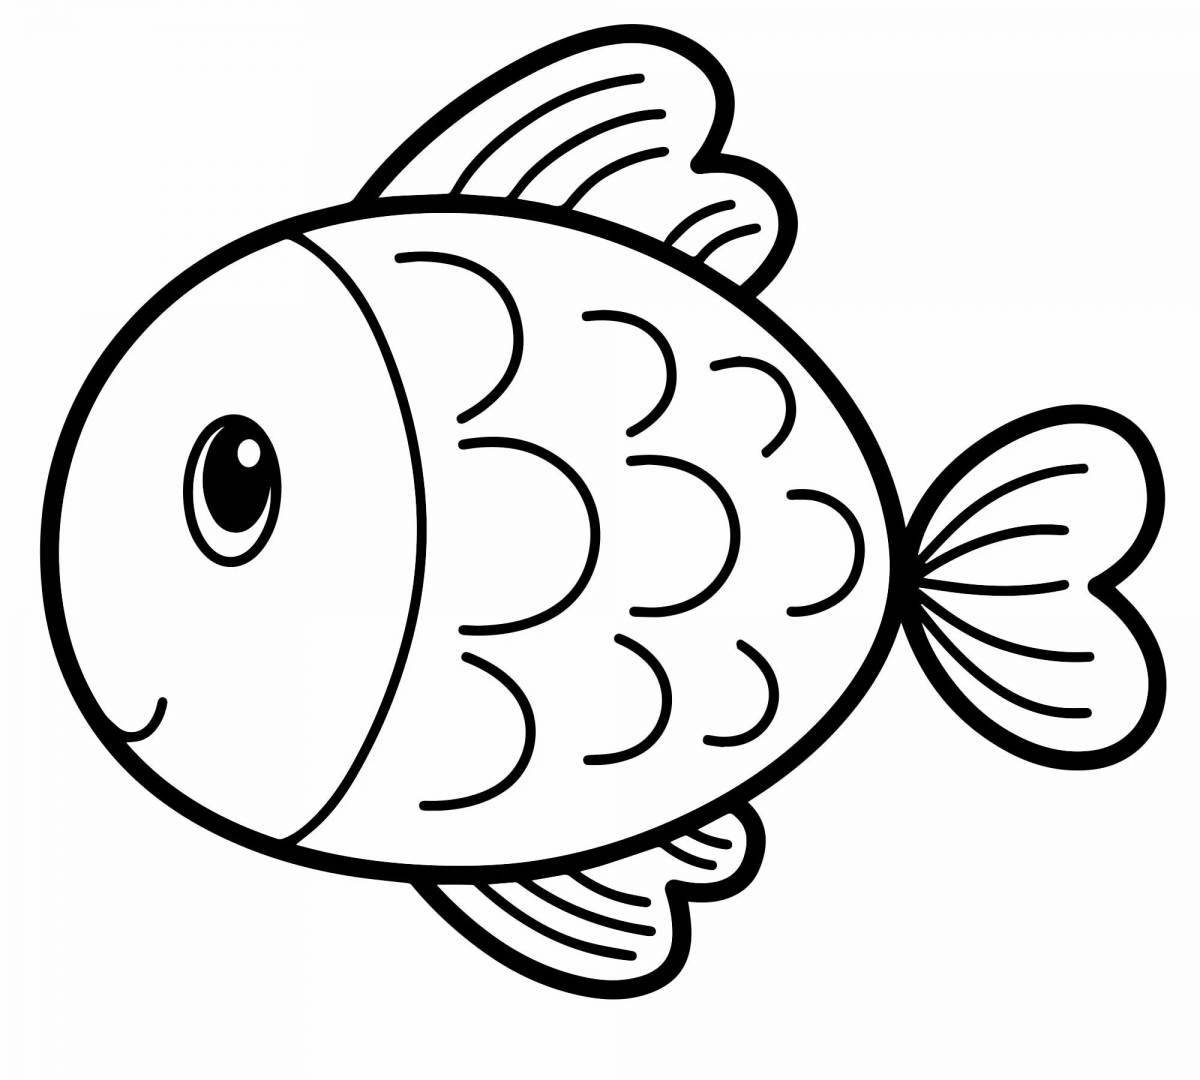 Adorable fish drawing for kids